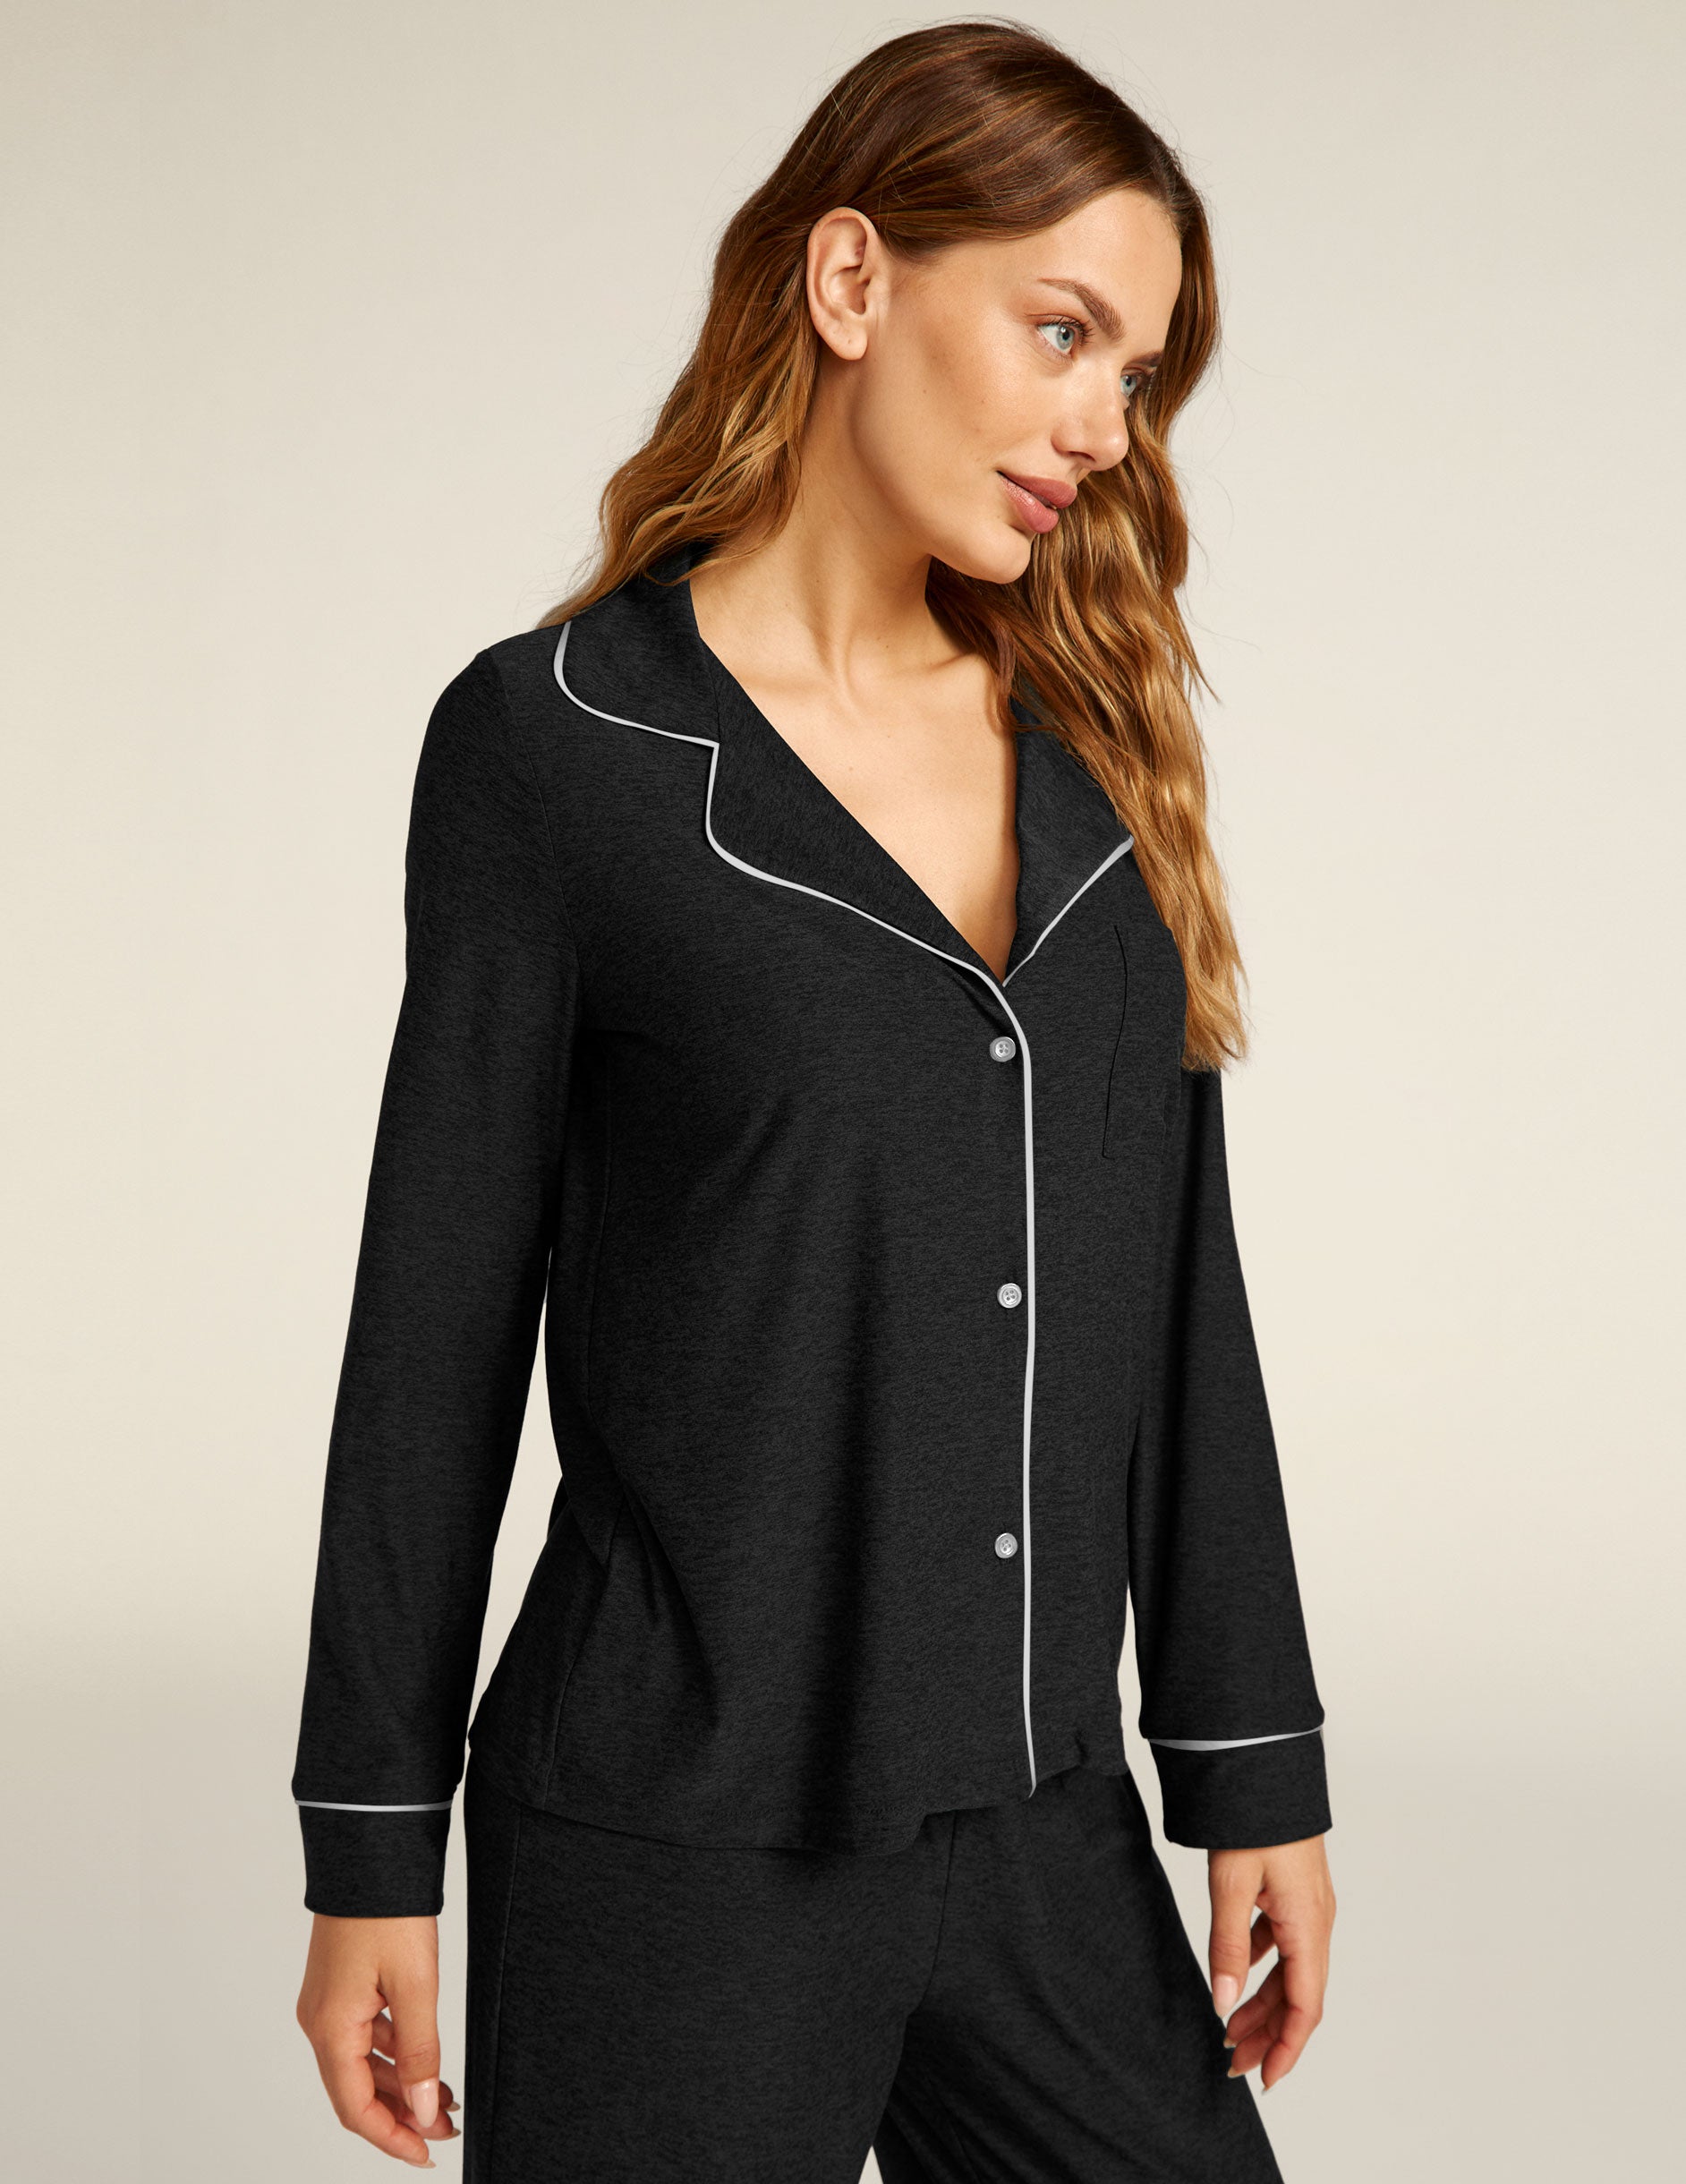 black long sleeve sleep top with white piping. 